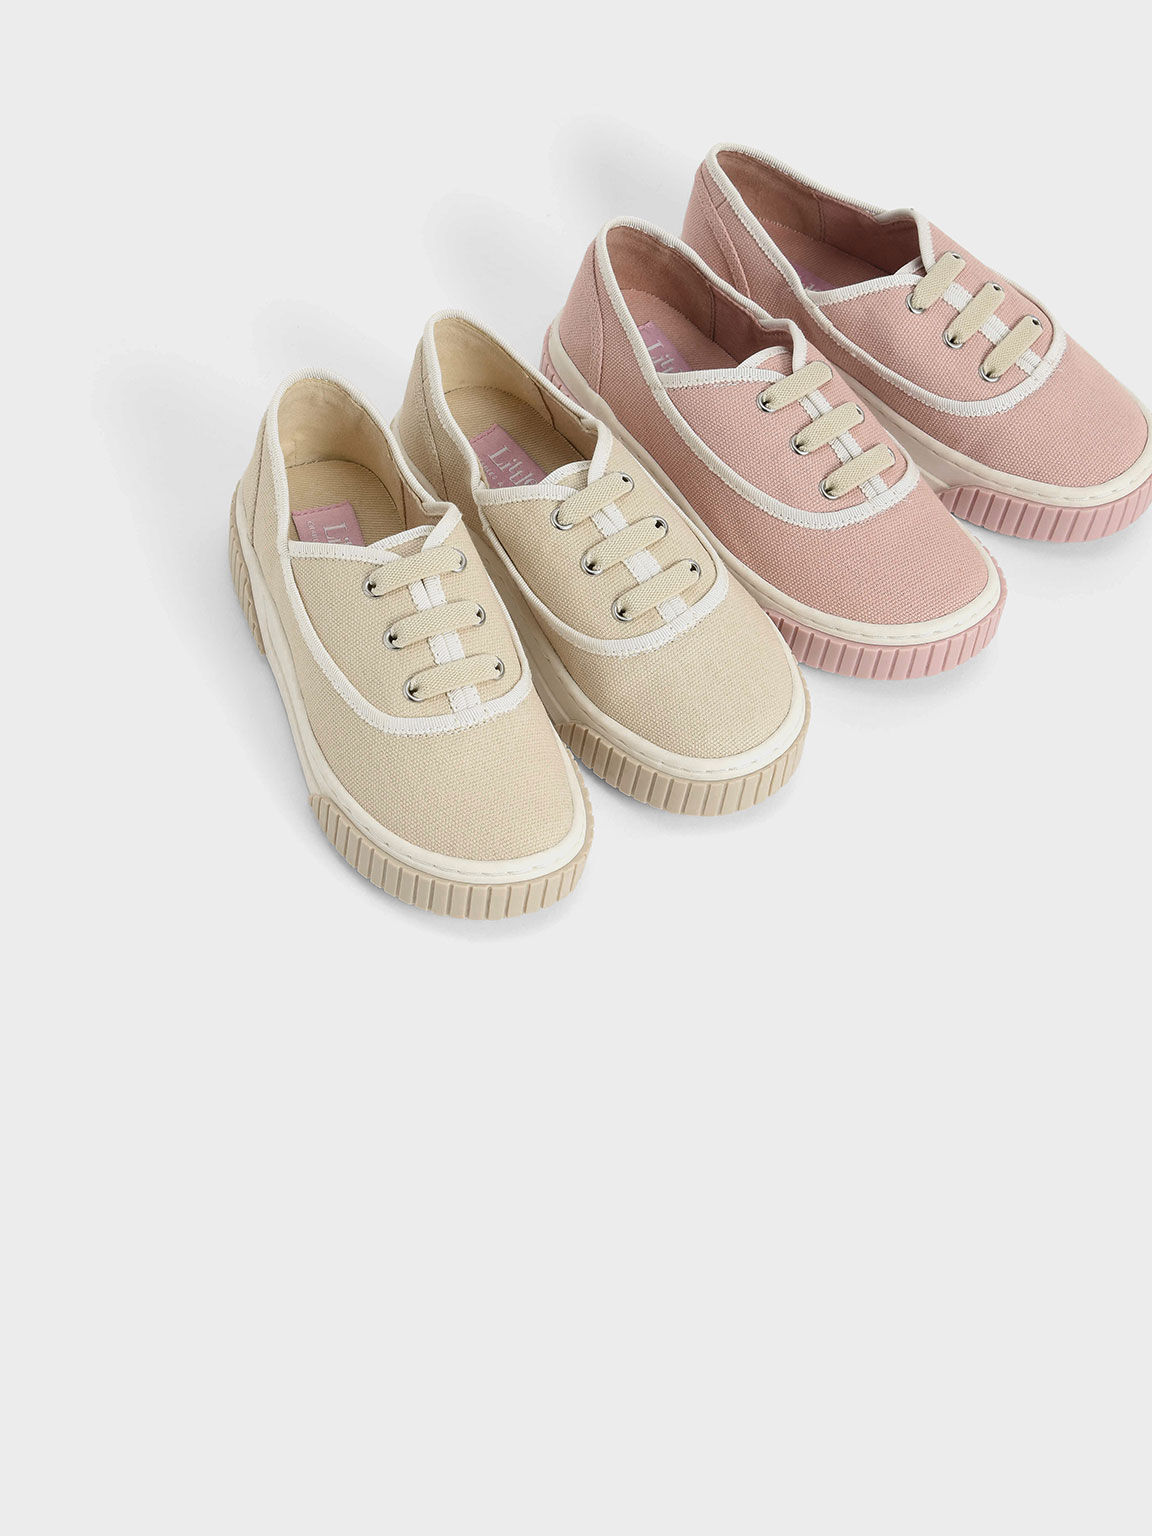 Girls' Canvas & Cotton Slip-On Sneakers, Chalk, hi-res